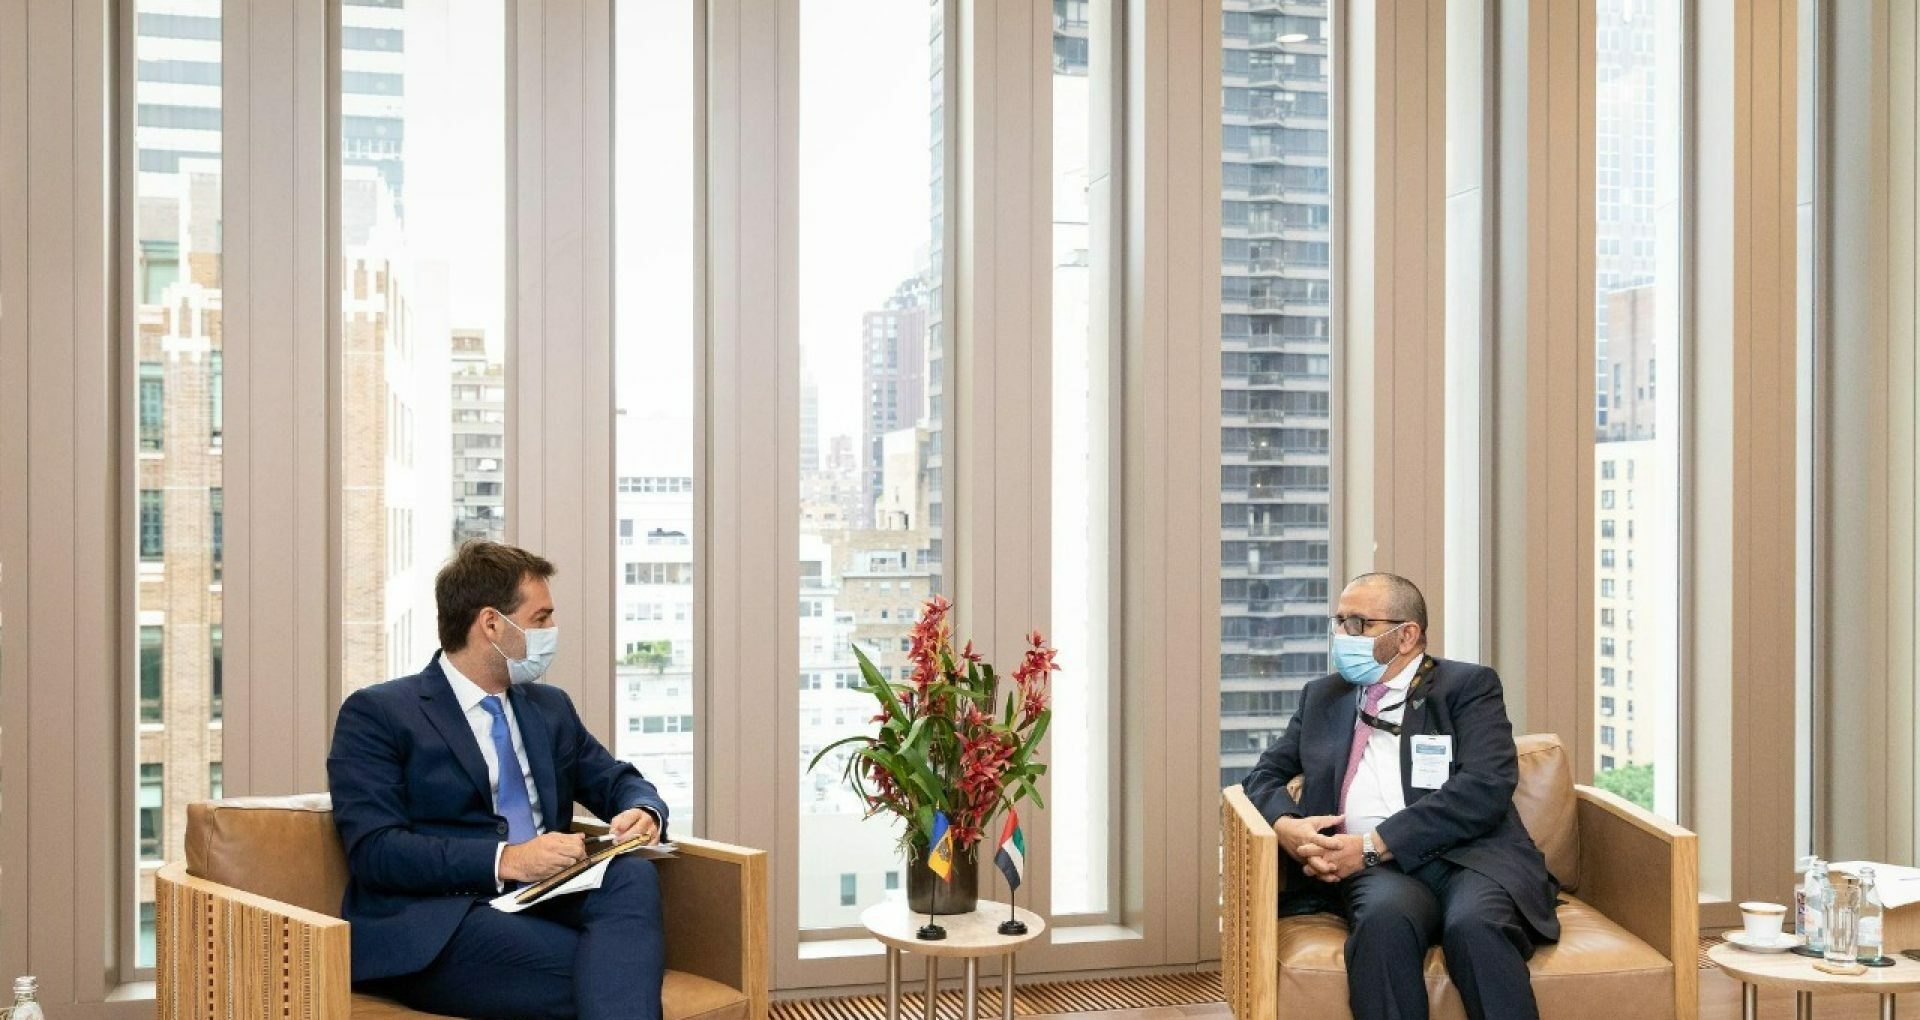 Emirati investments in Moldova’s Economy Discussed by Moldovan Ministry of Foreign Affairs and the Minister of State of the United Arab Emirates in New York